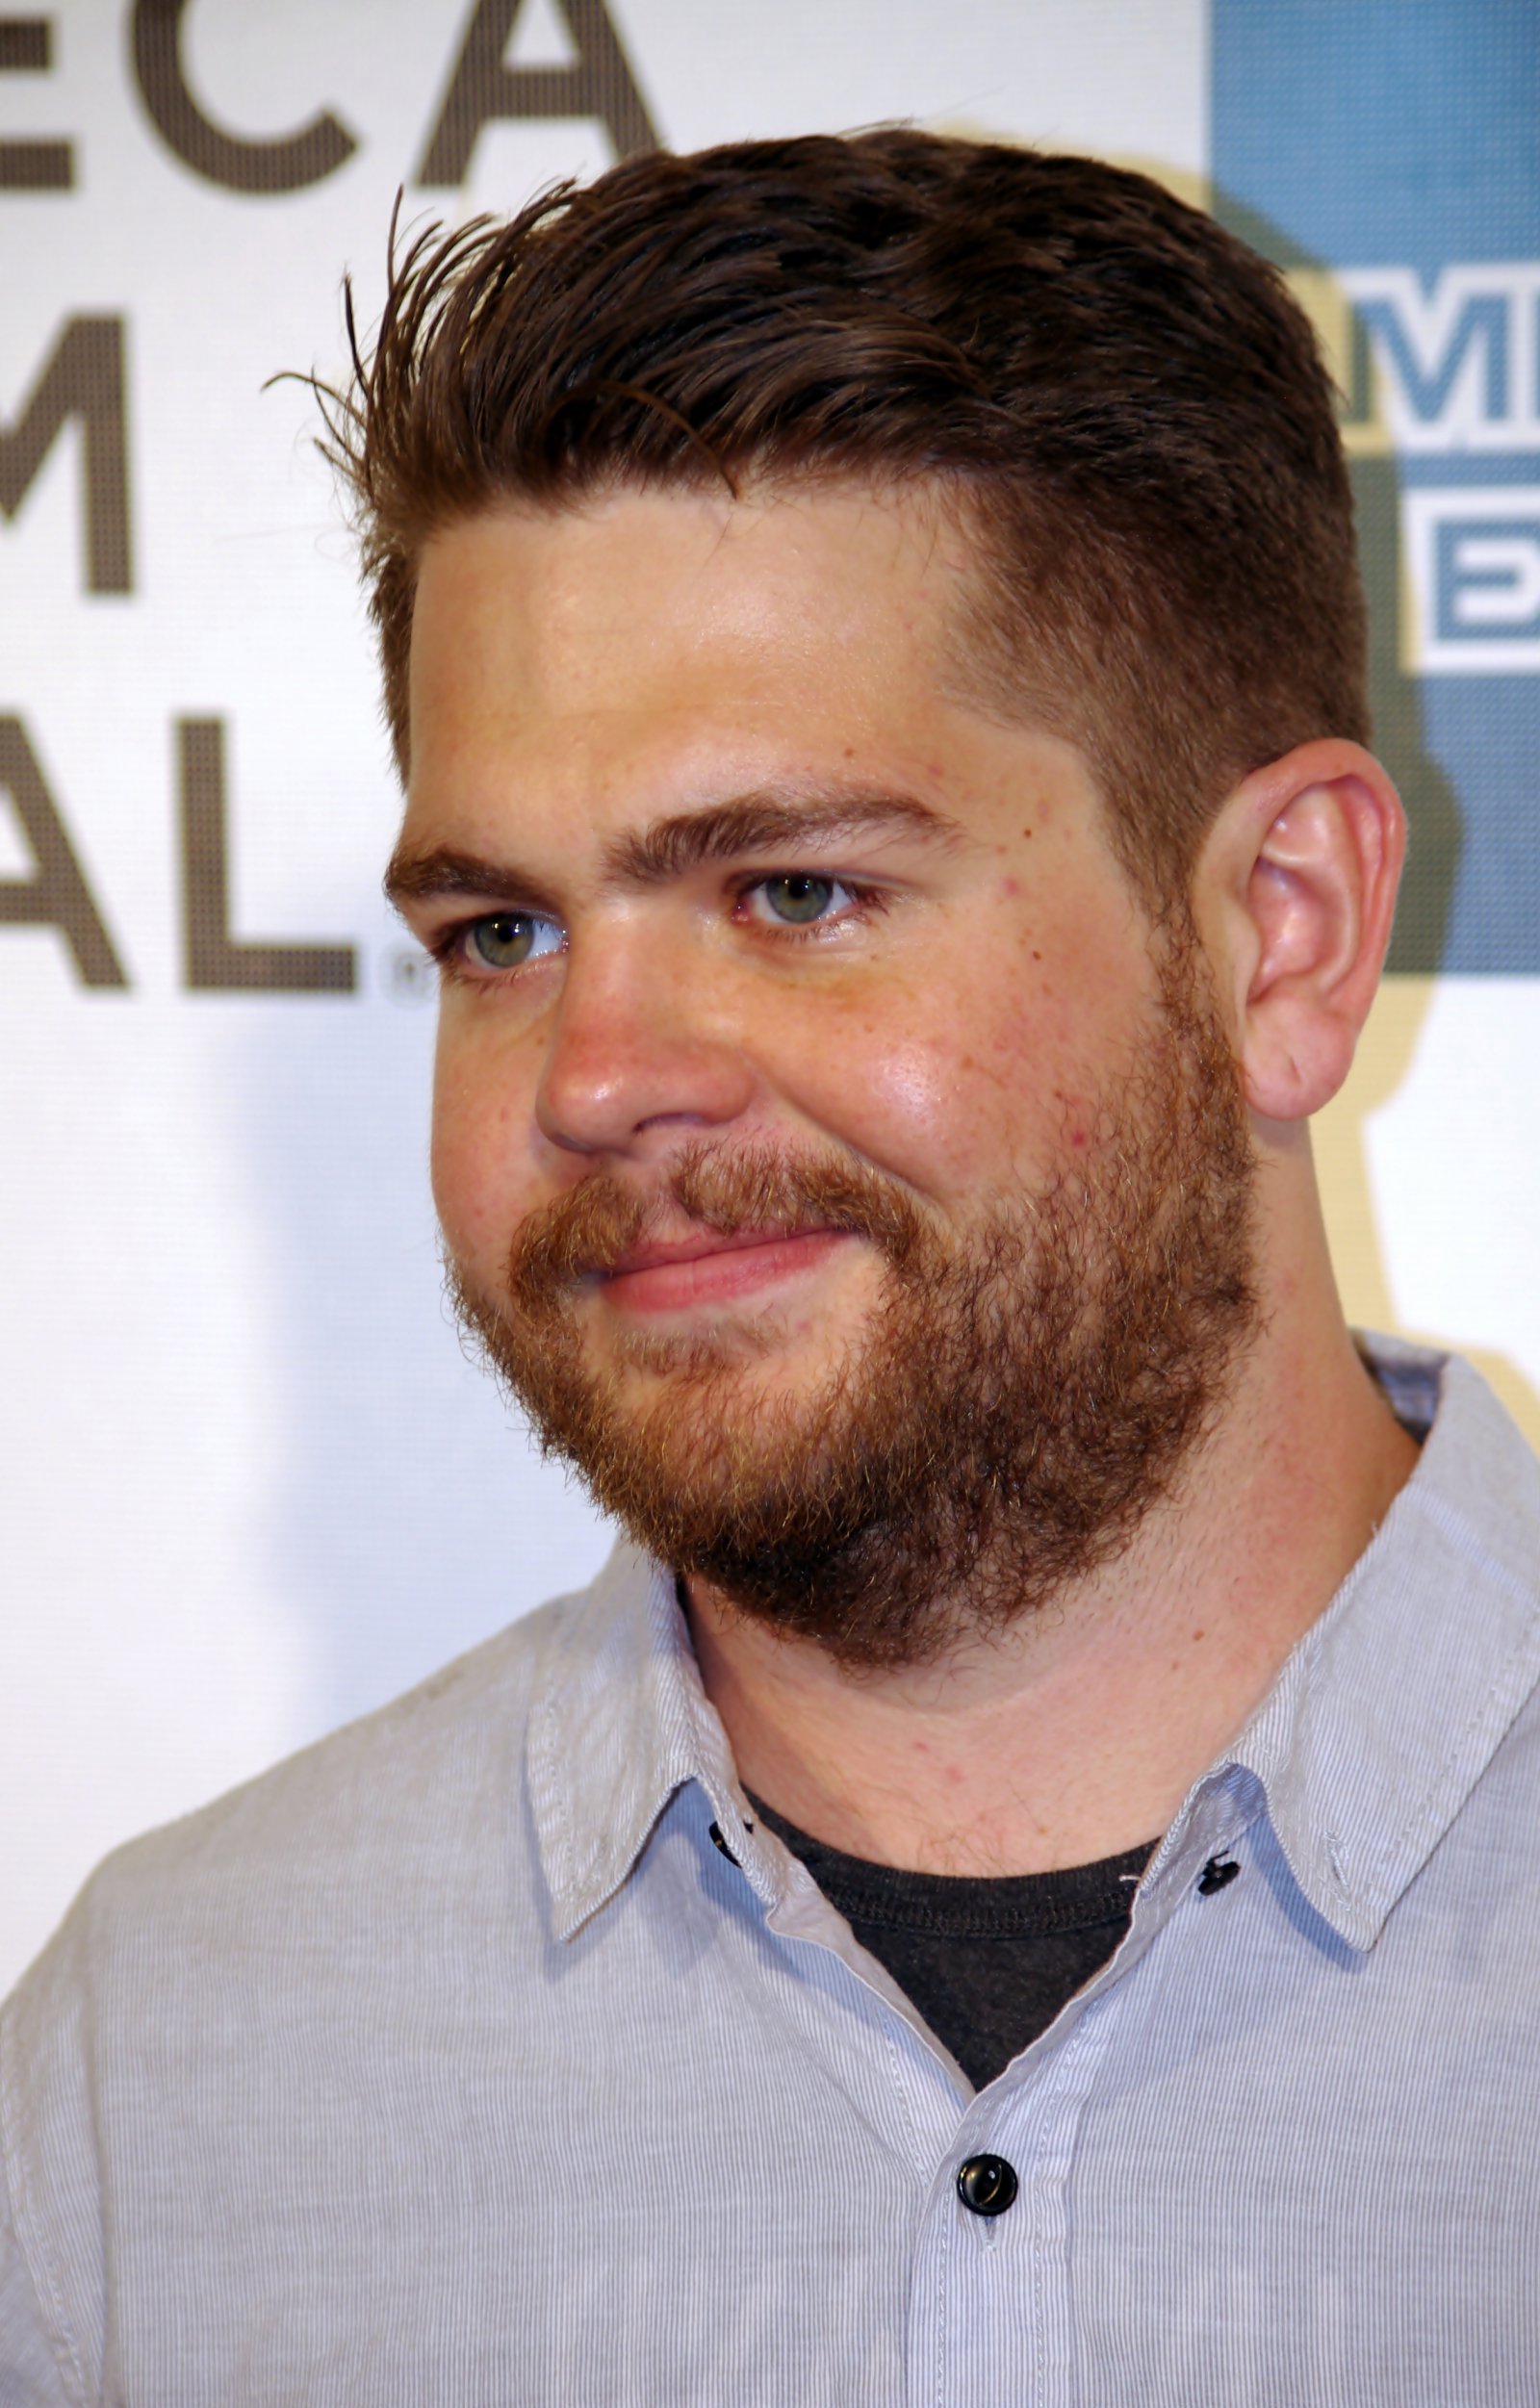 Jack Osbourne to star in new 'Haunted Highway' Syfy reality series